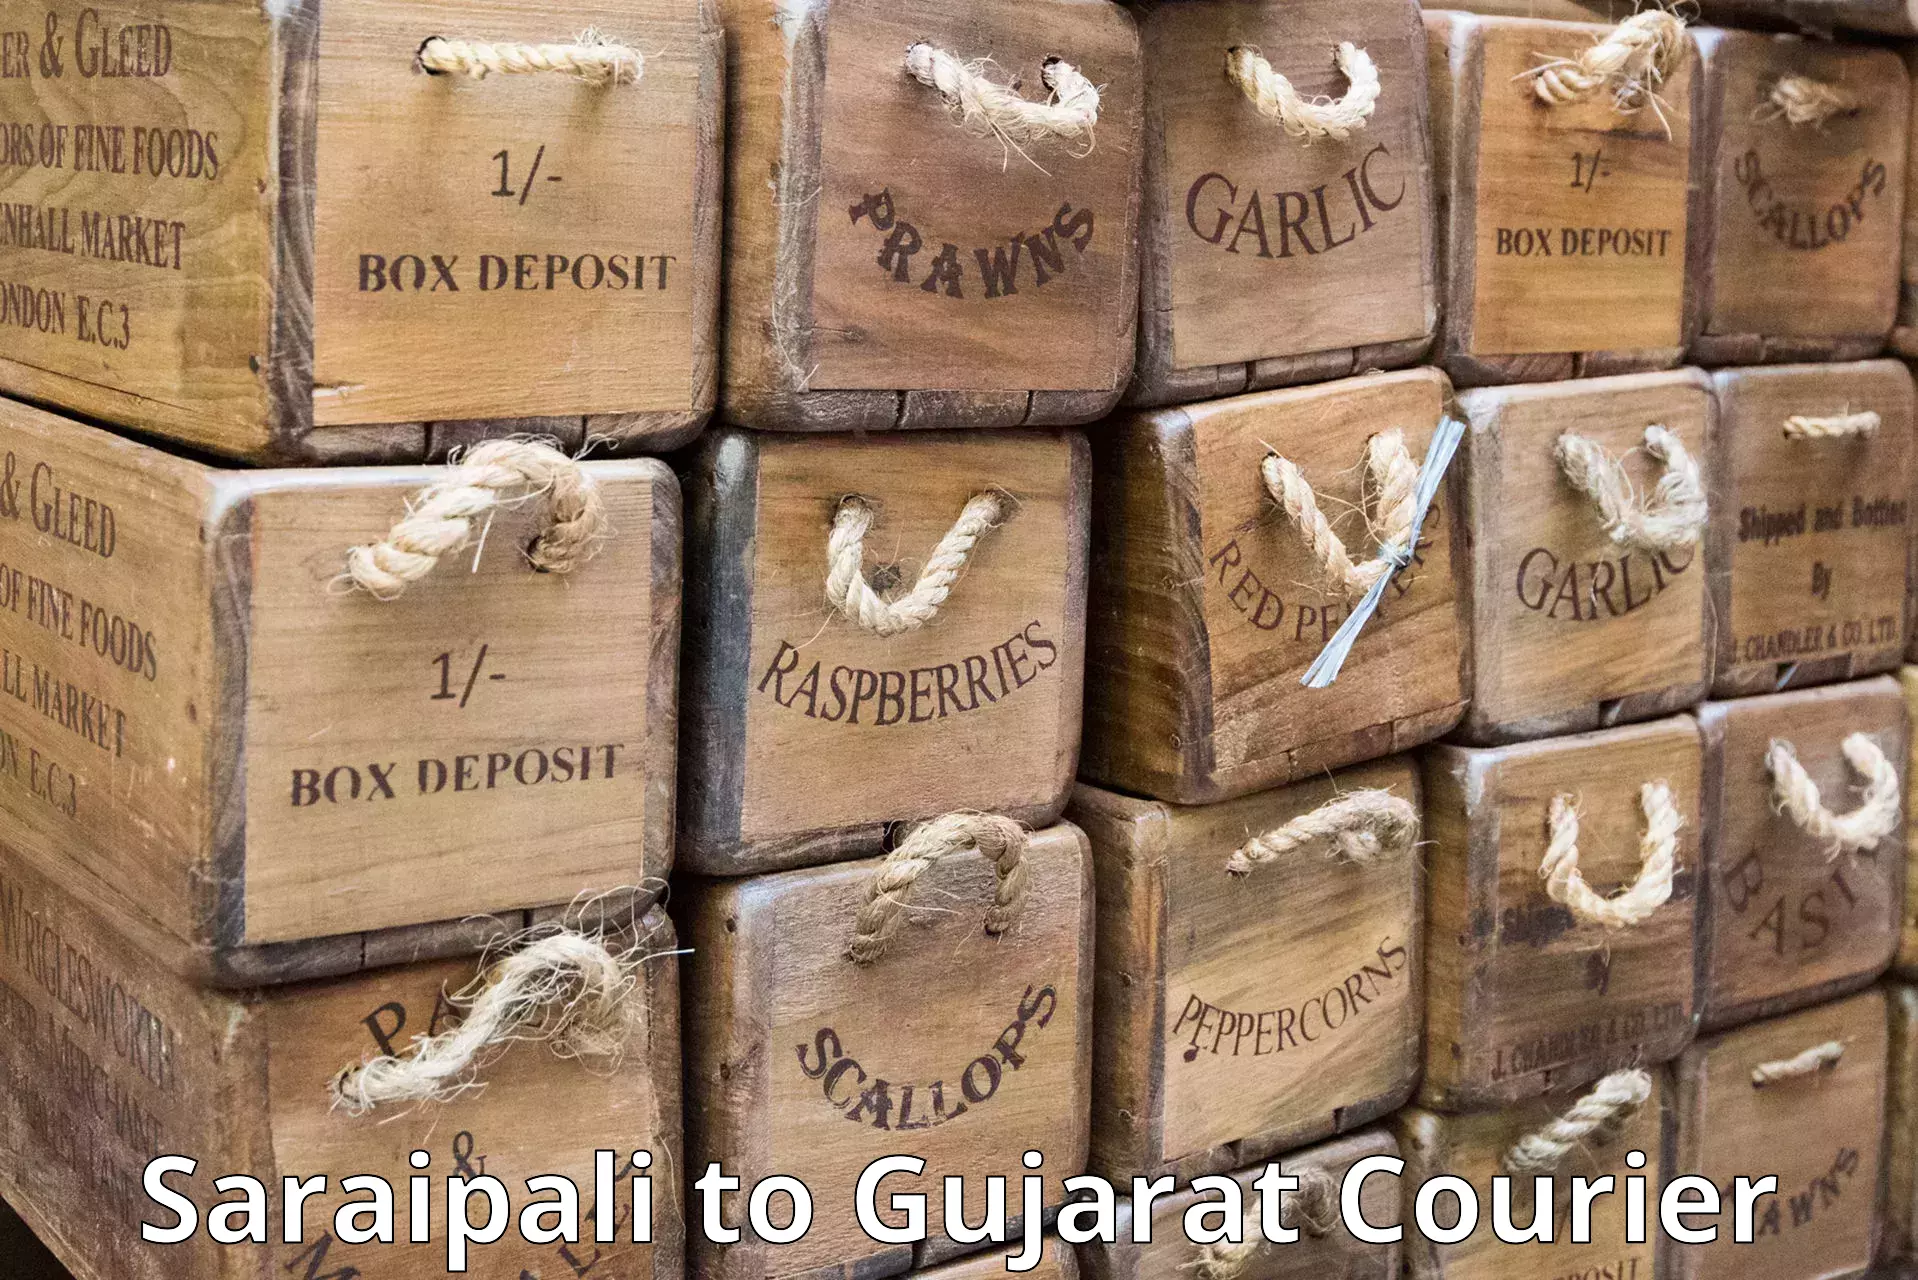 Courier service booking Saraipali to Dholka